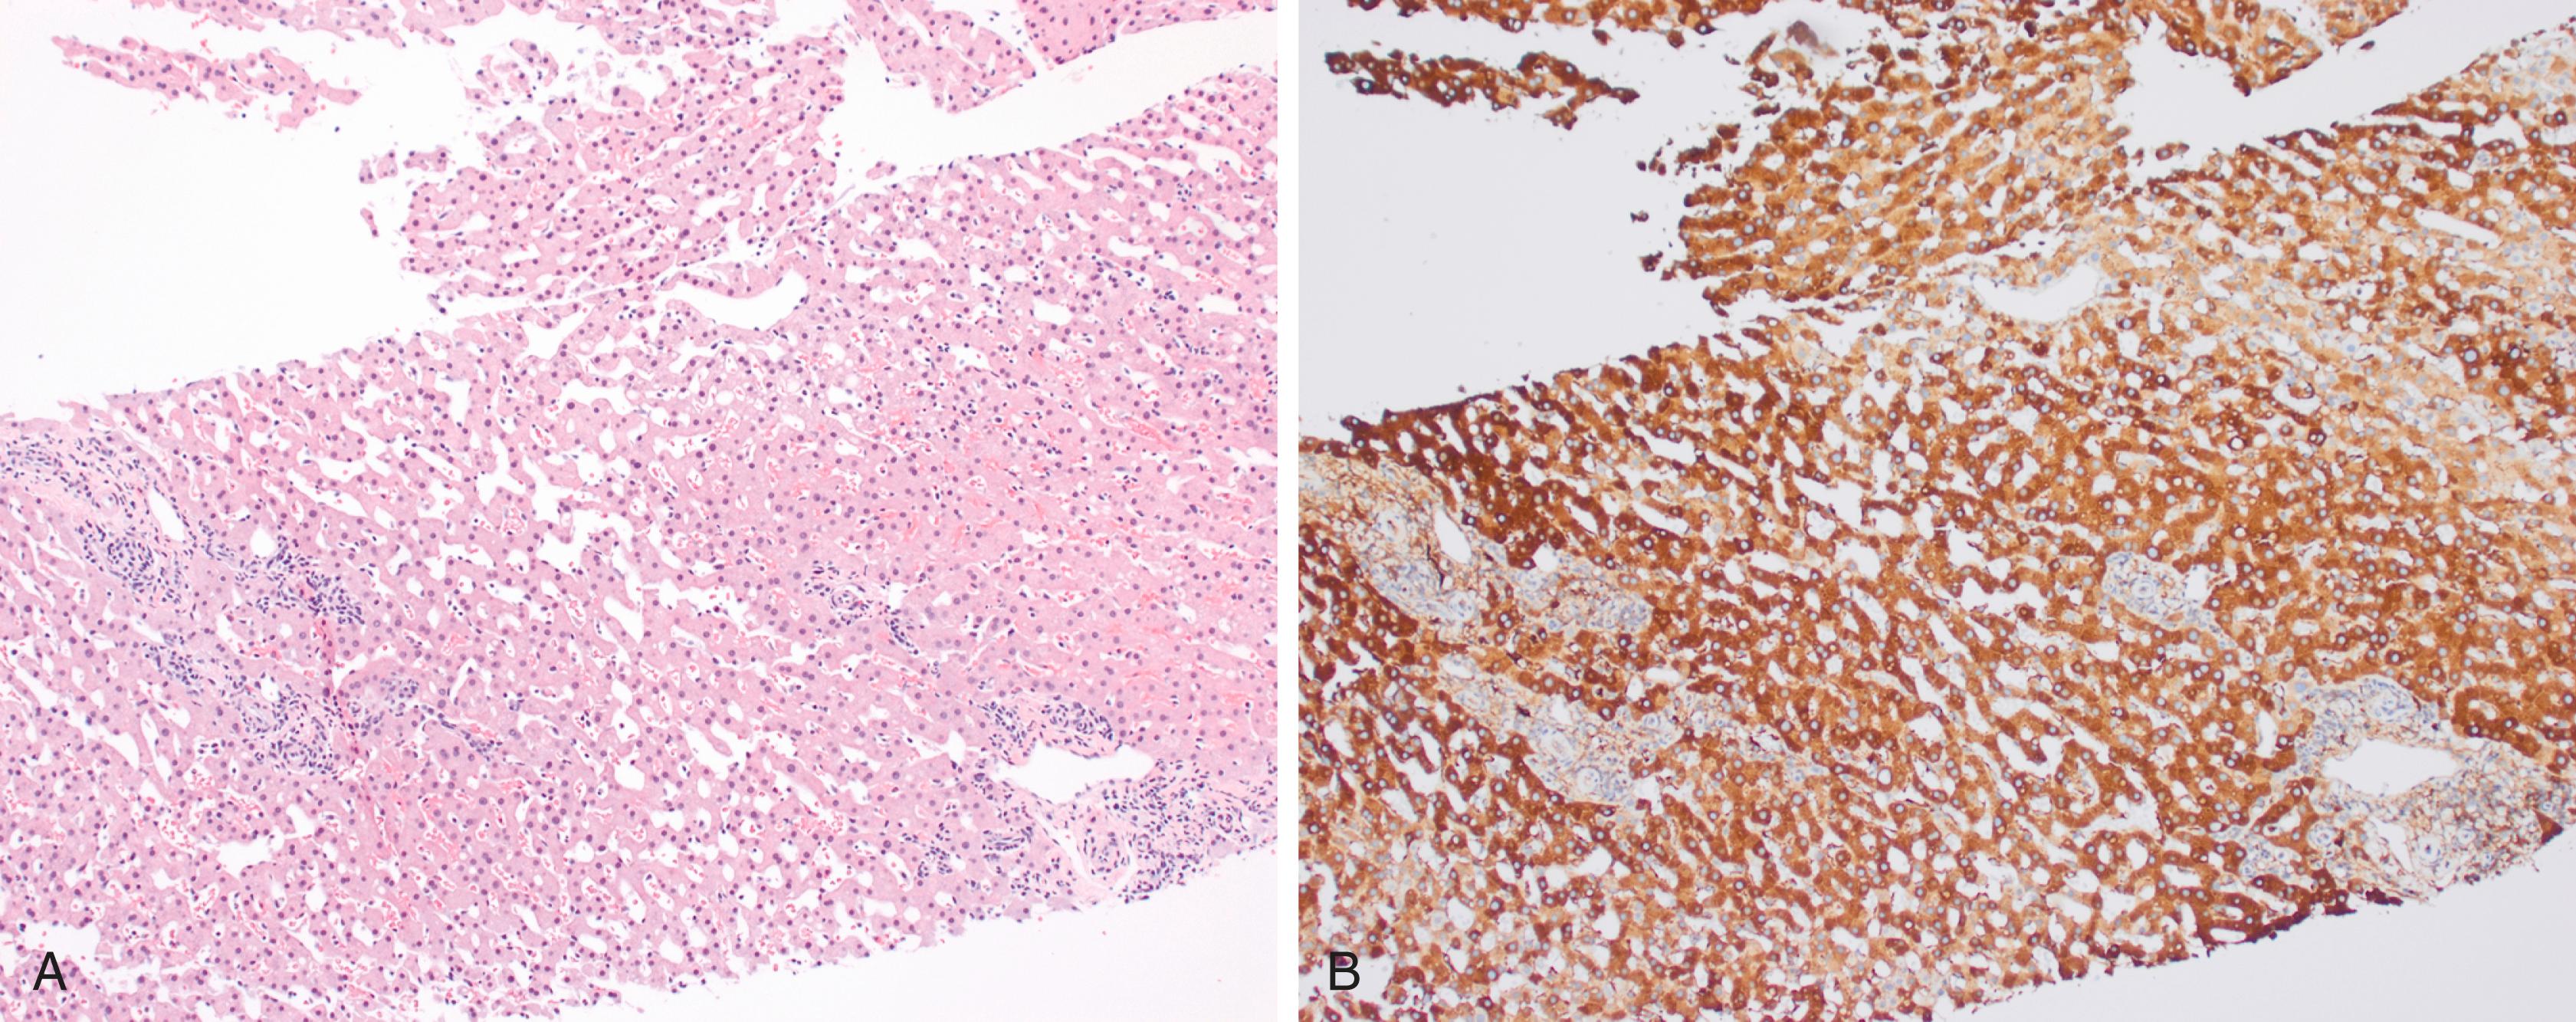 FIGURE 56.4, Inflammatory hepatocellular adenoma characterized by sinusoidal dilation and mild ductular reaction (A). The lesional hepatocytes show diffuse staining with C-reactive protein (B).